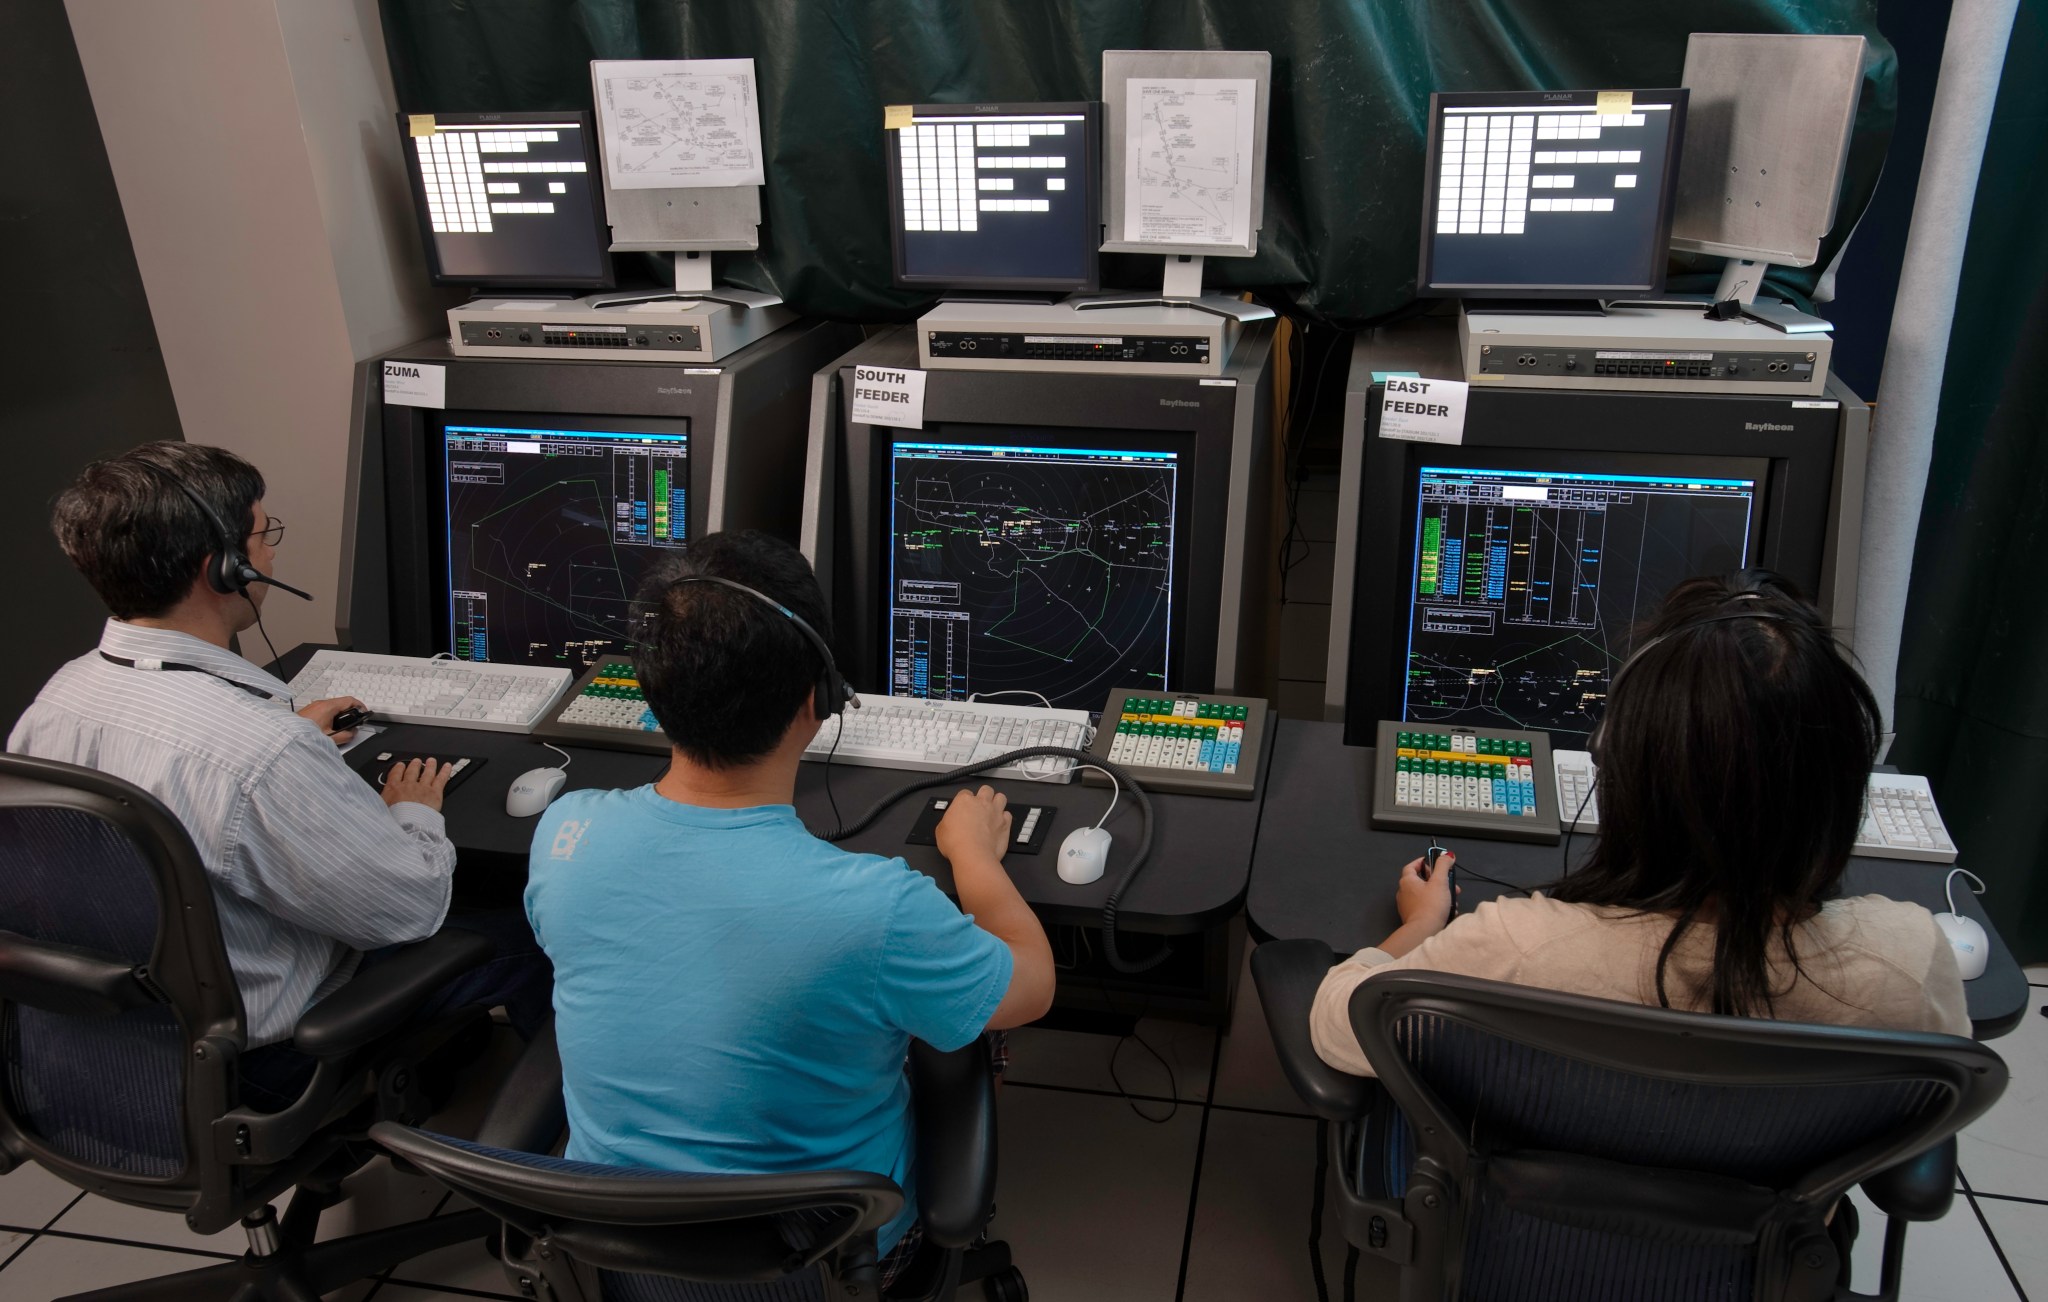 Three people at workstations in ATC simulation lab